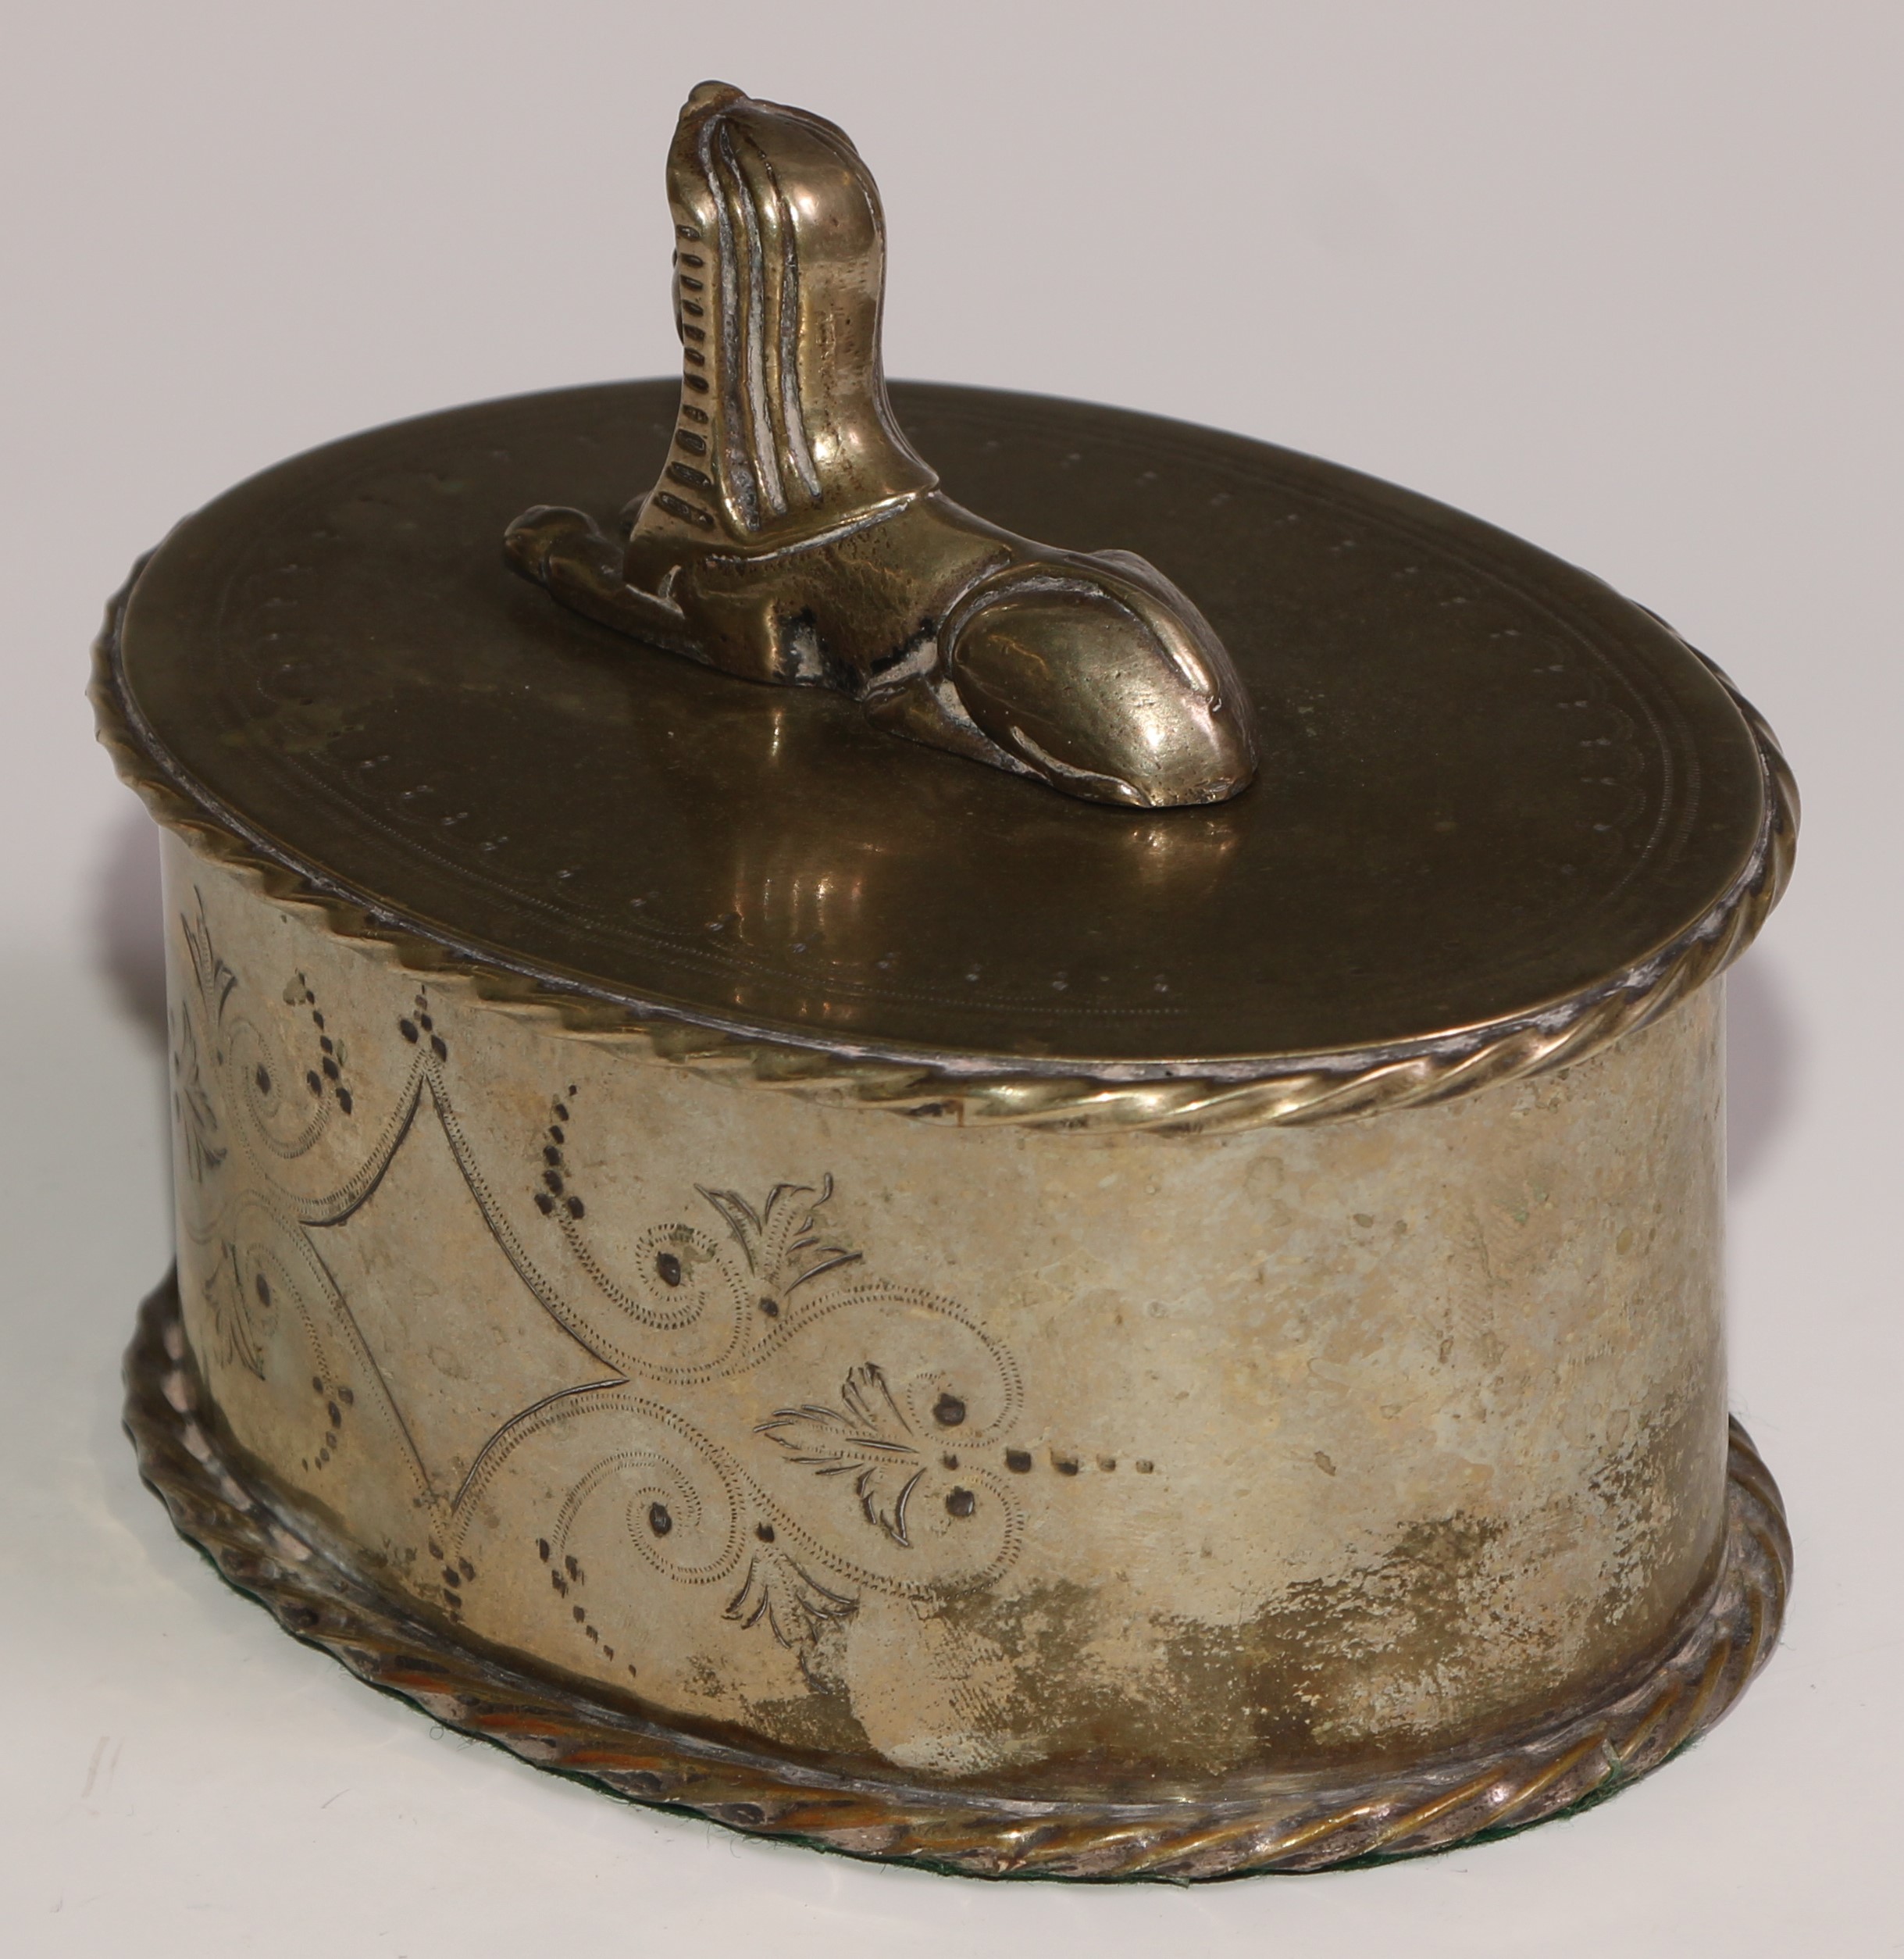 A Victorian Egyptian Revival silver plated oval box and cover, bright-cut engraved and surmounted by - Image 4 of 5